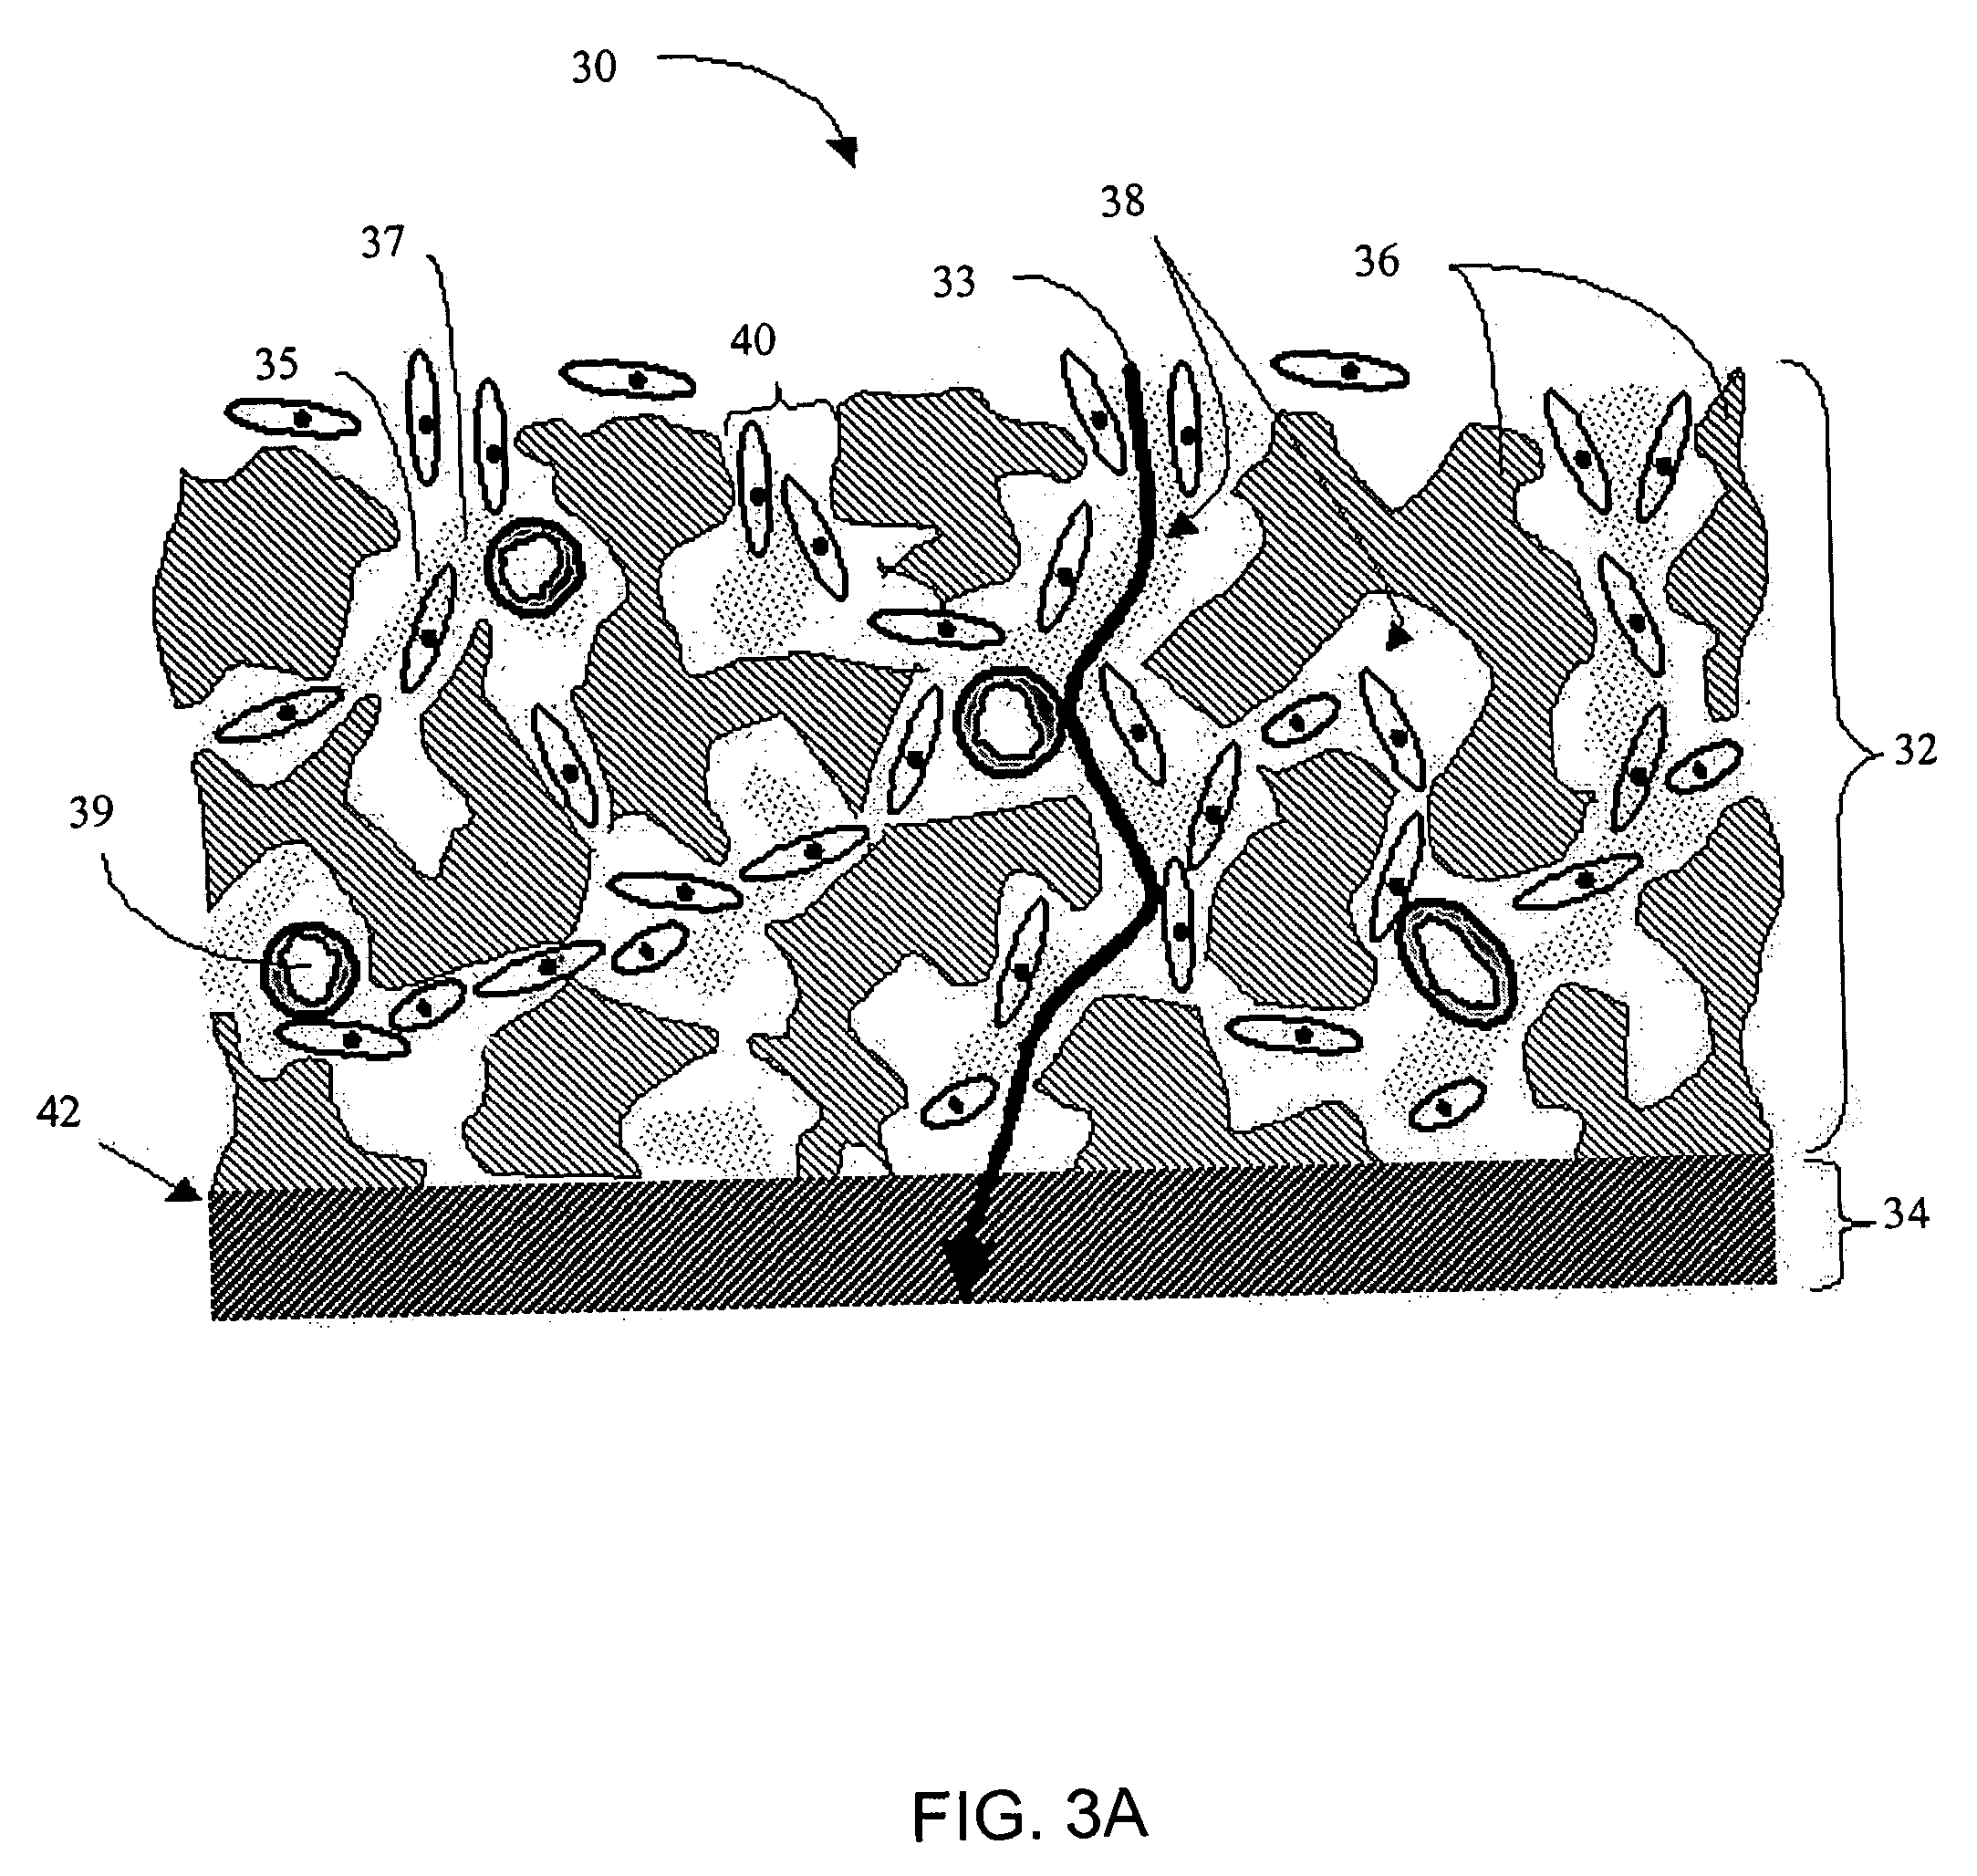 Porous membranes for use with implantable devices